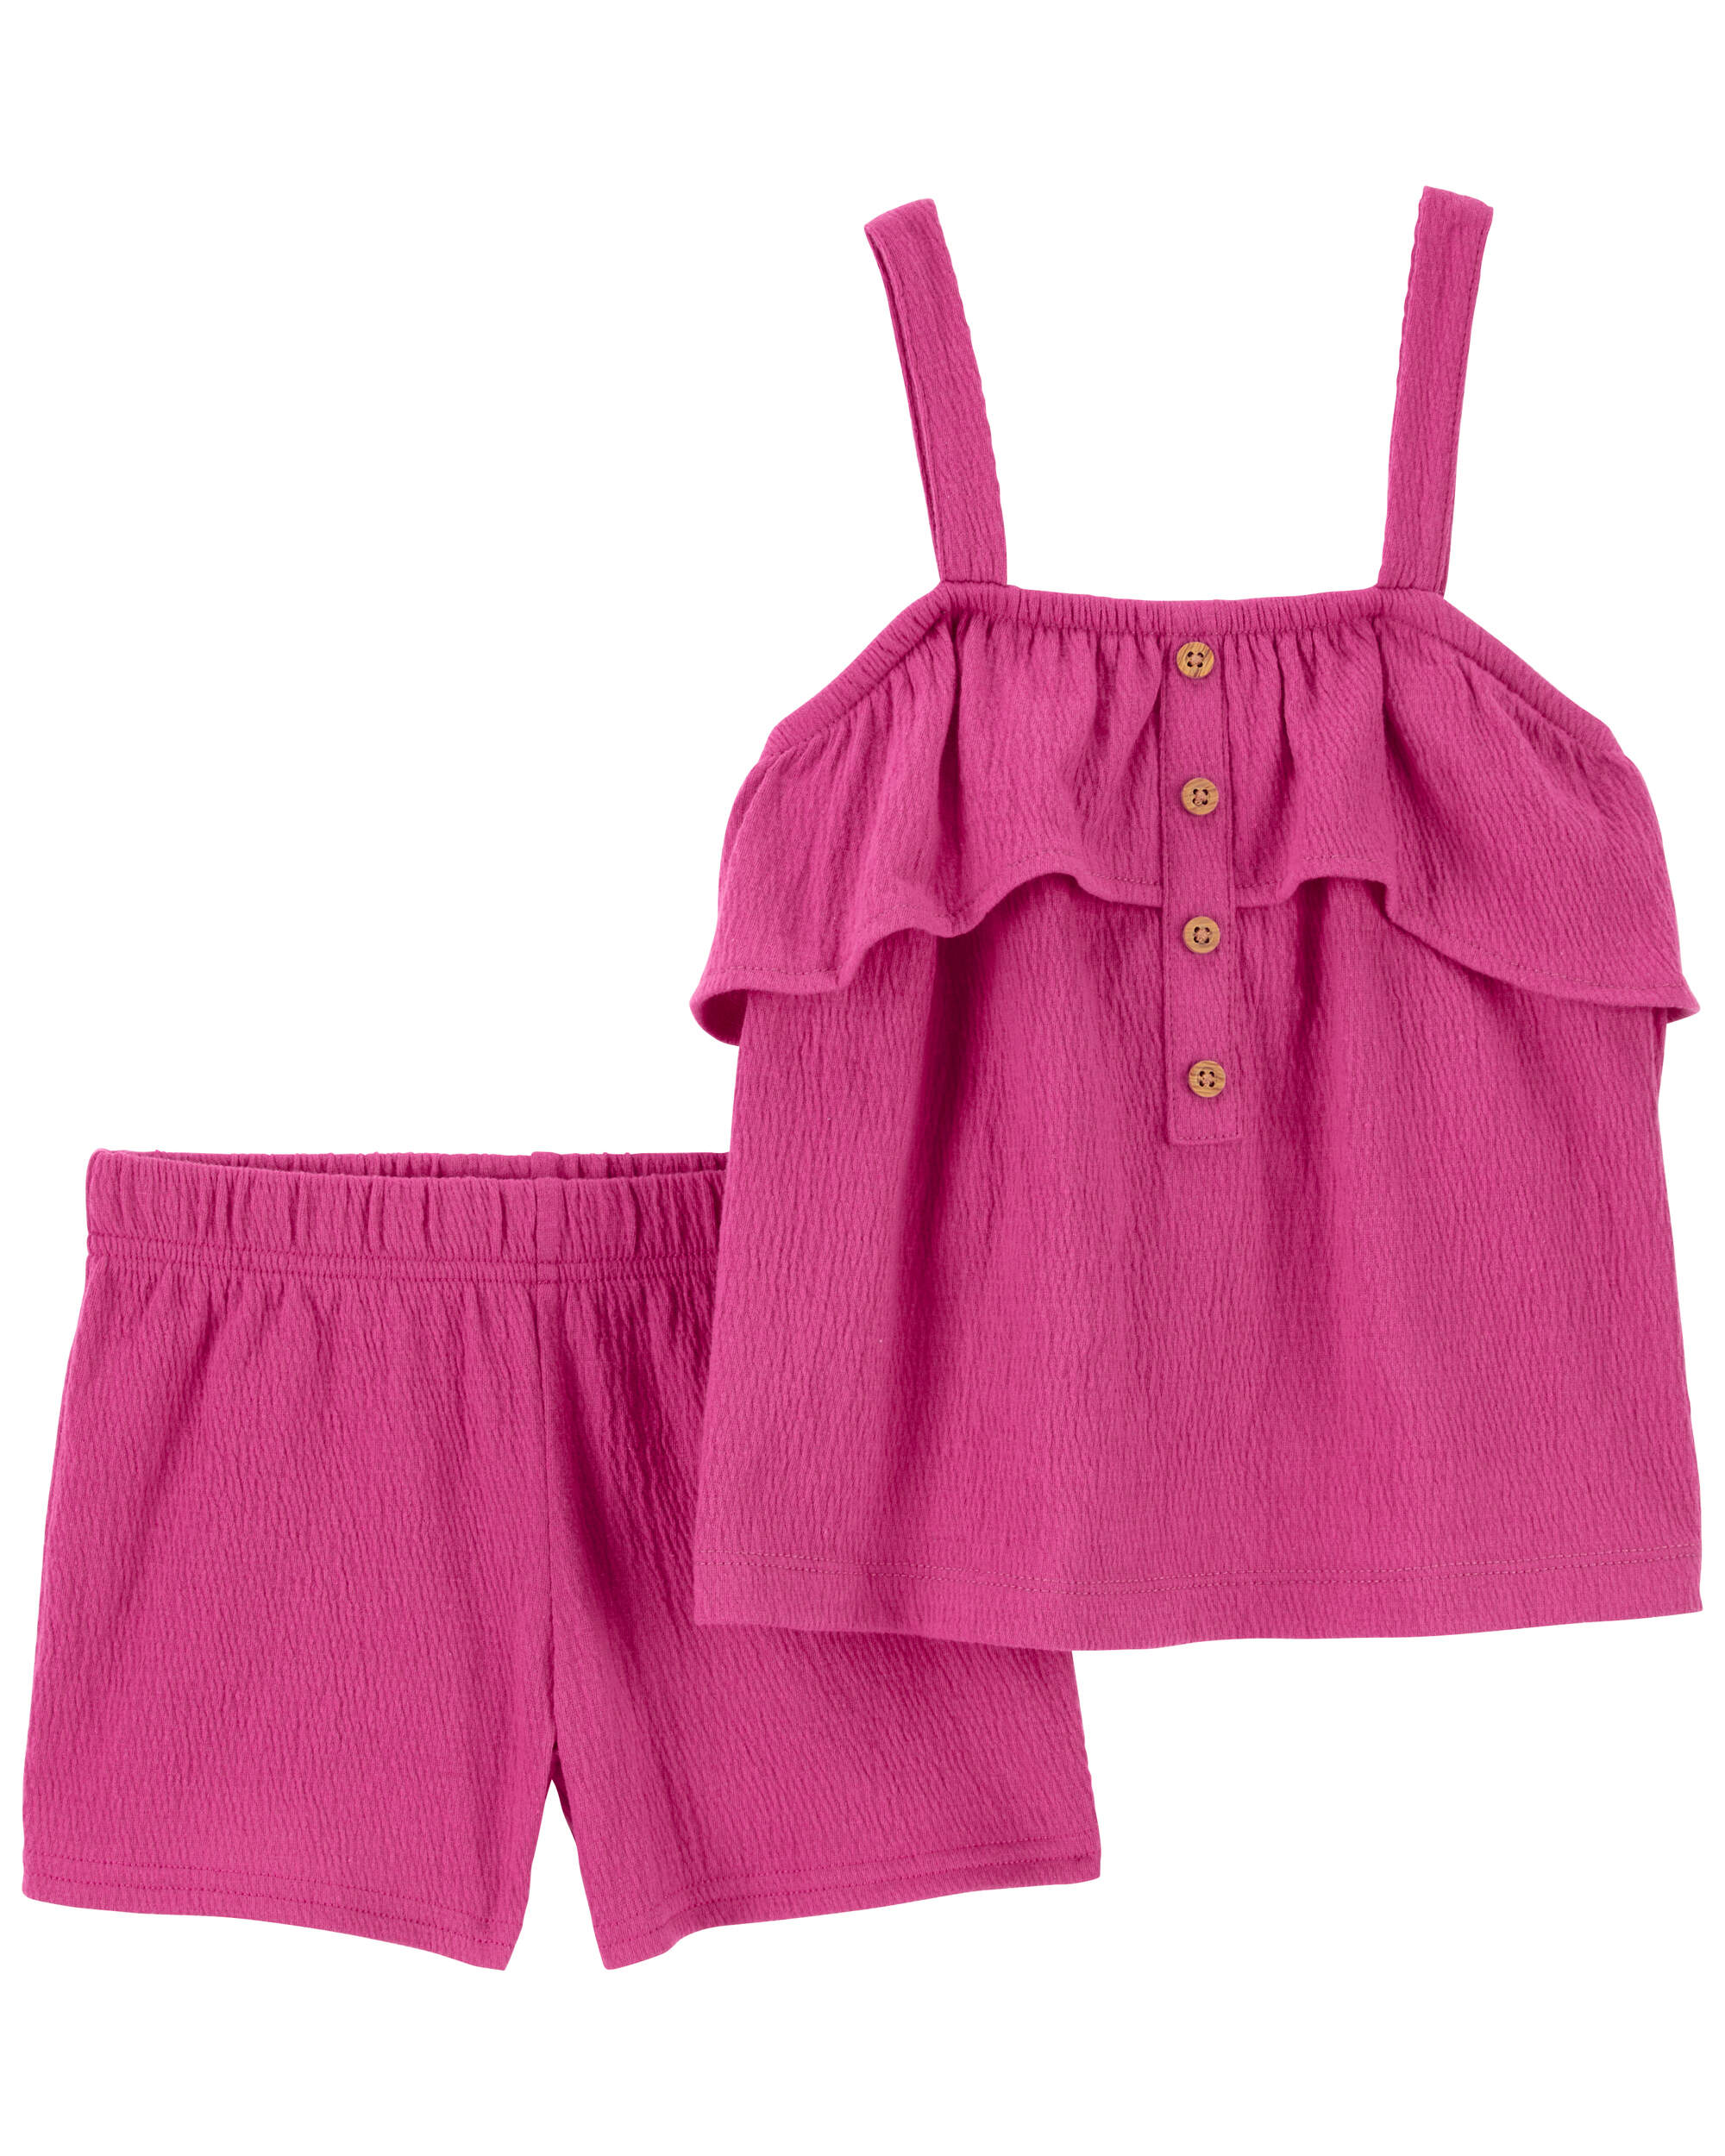 2-Piece Crinkle Jersey Outfit Set